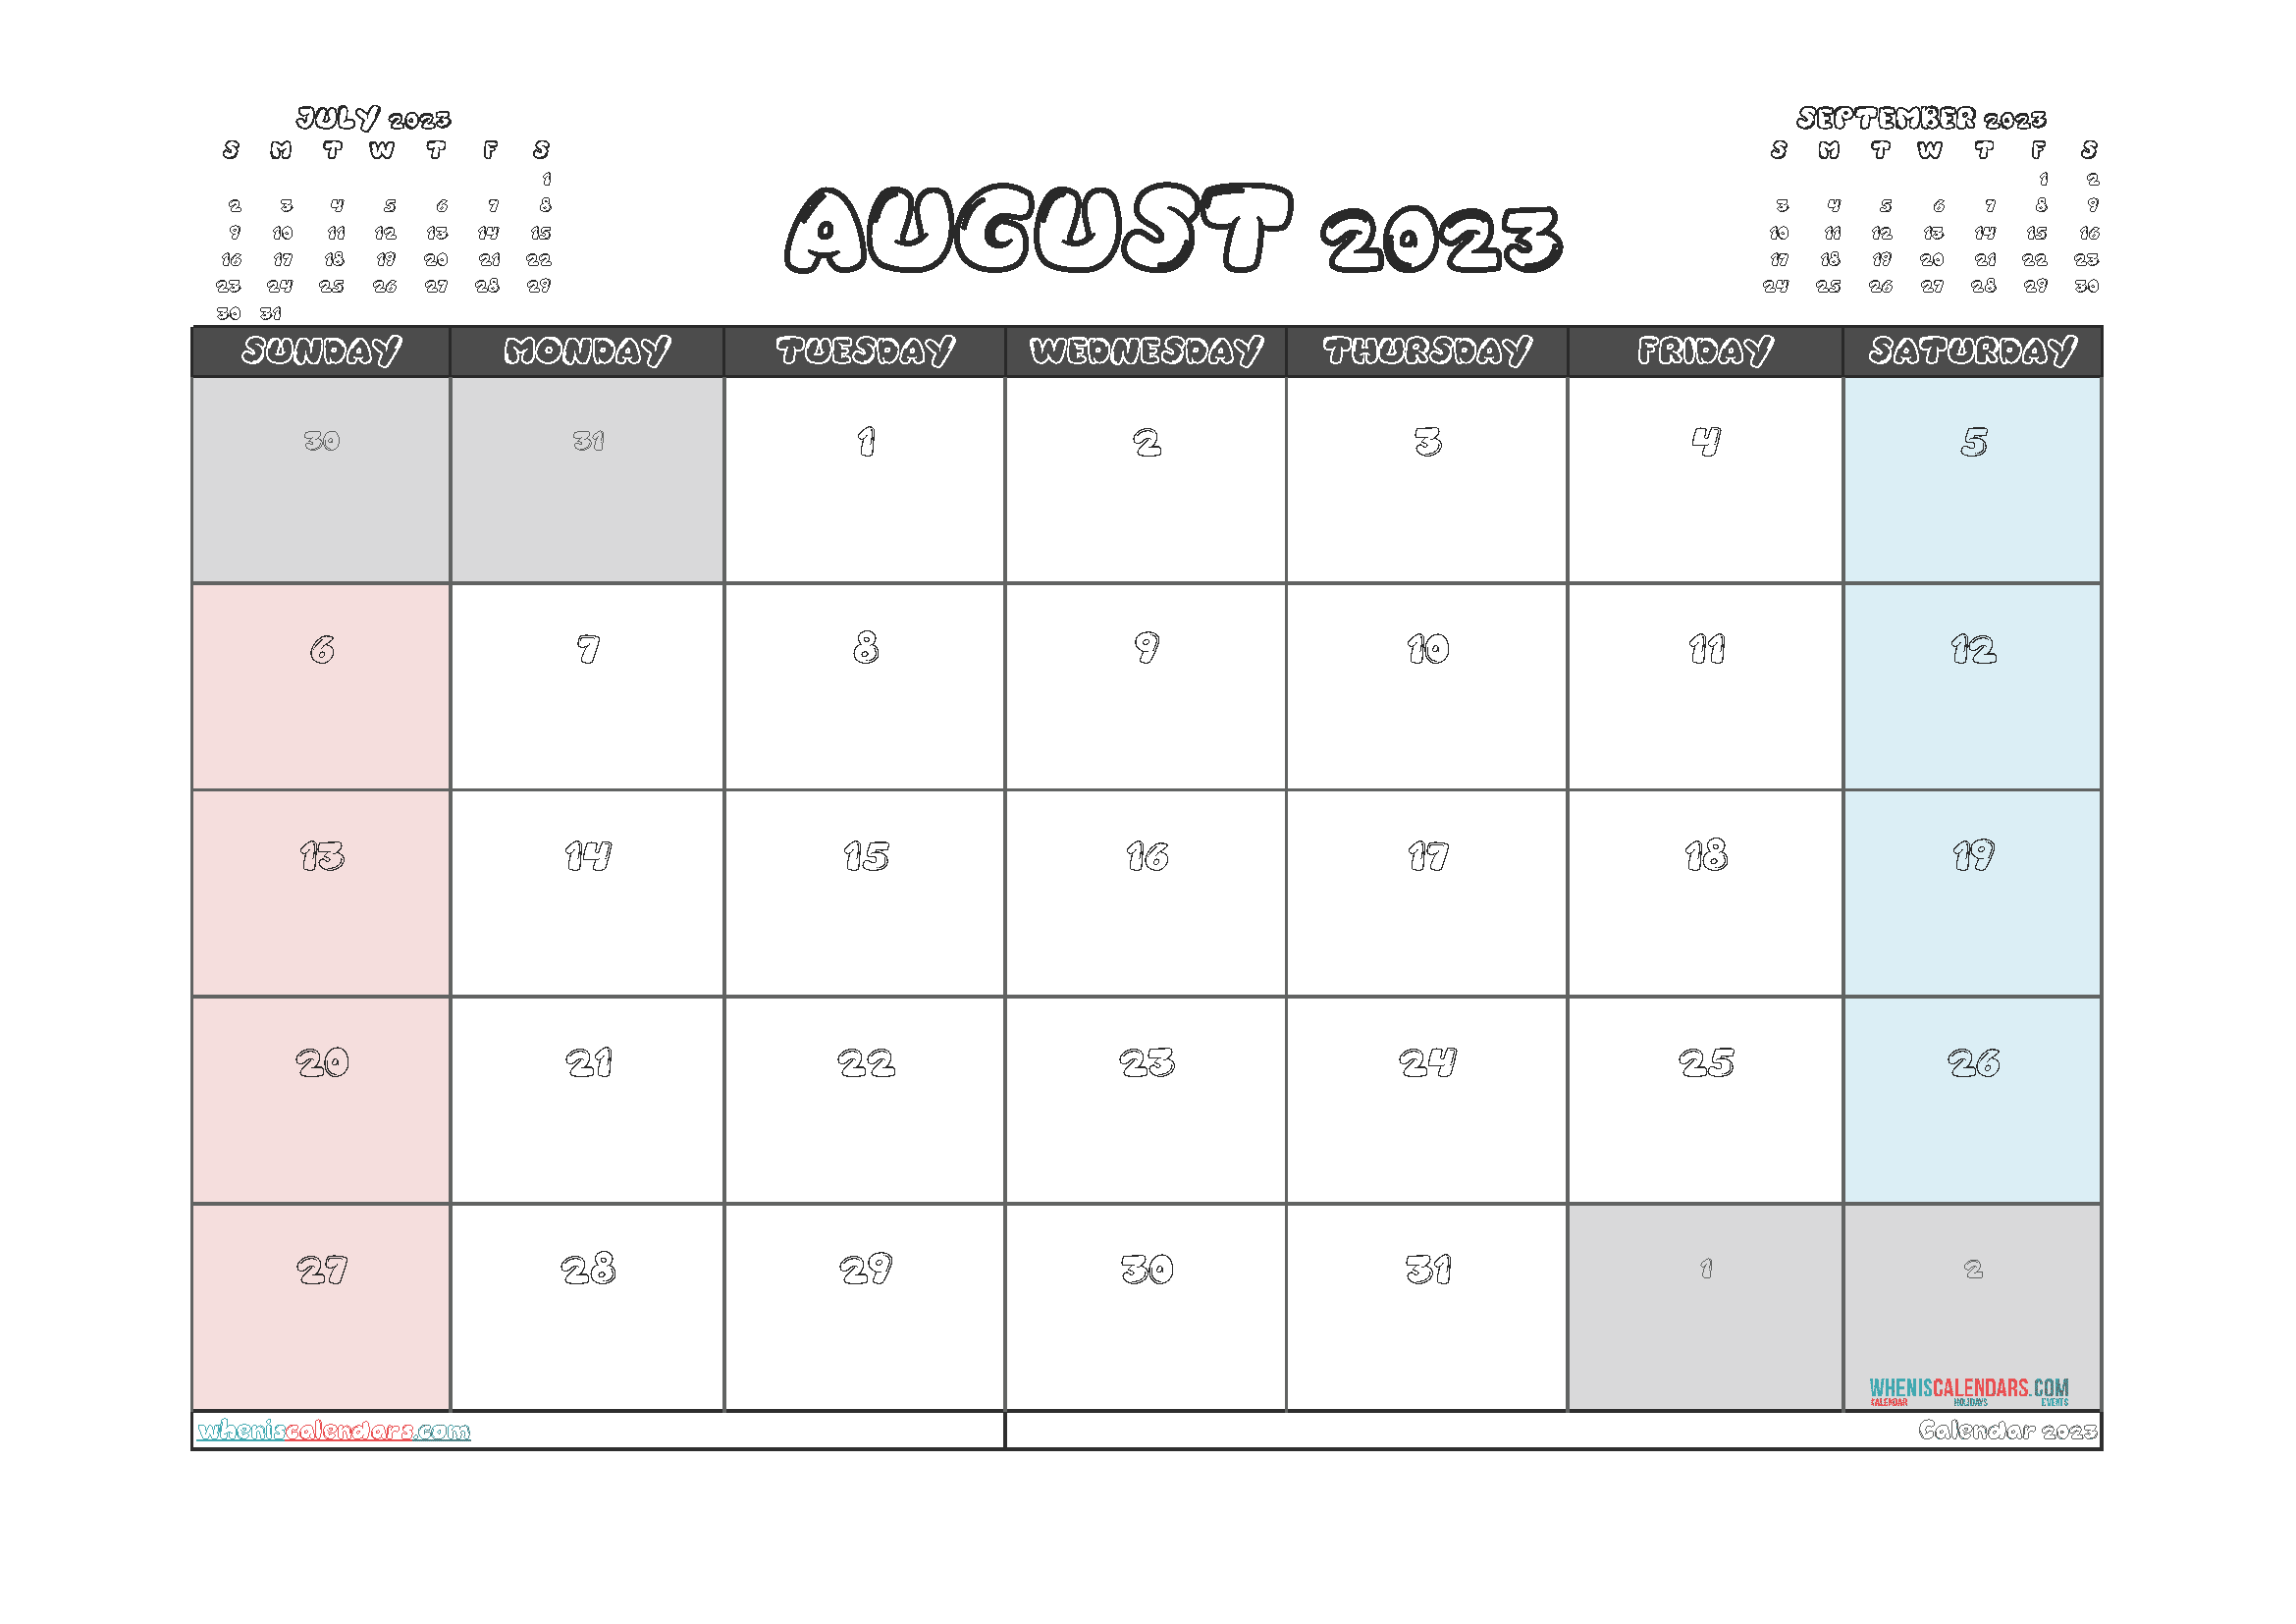 Free Printable Calendar 2023 August with Holidays PDF in Landscape